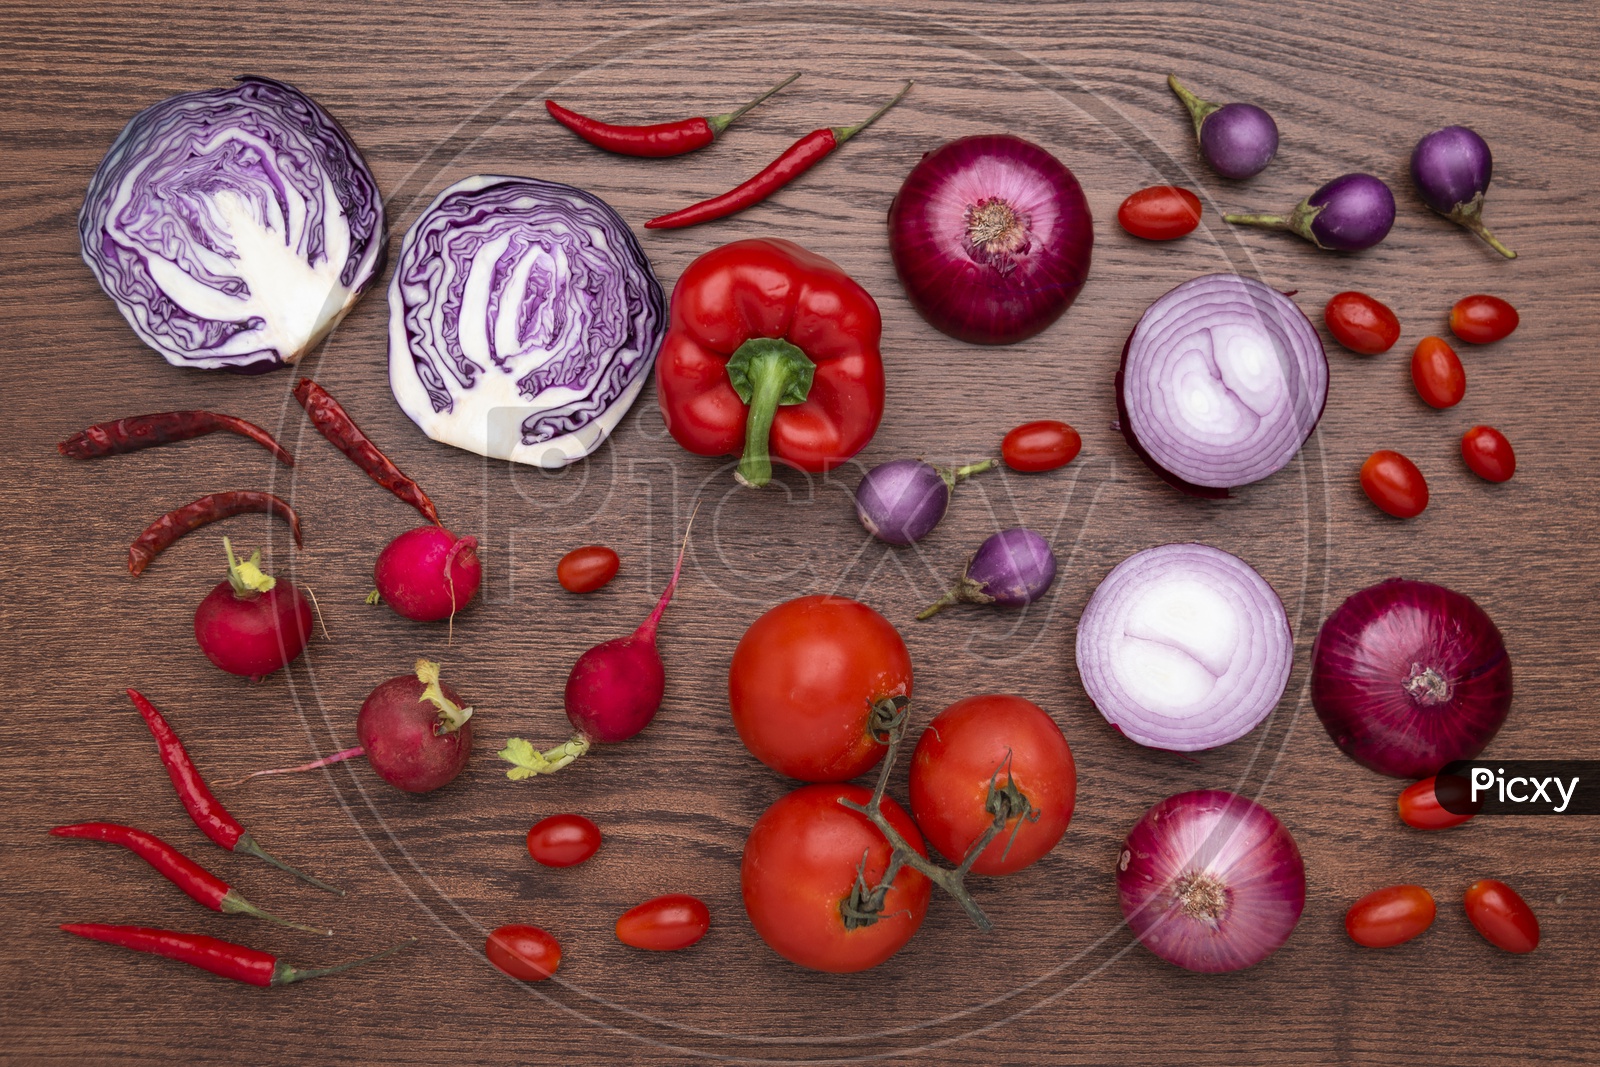 Top View of Fresh Vegetables on Wooden Background, Capsicum, Onions, Tomatoes